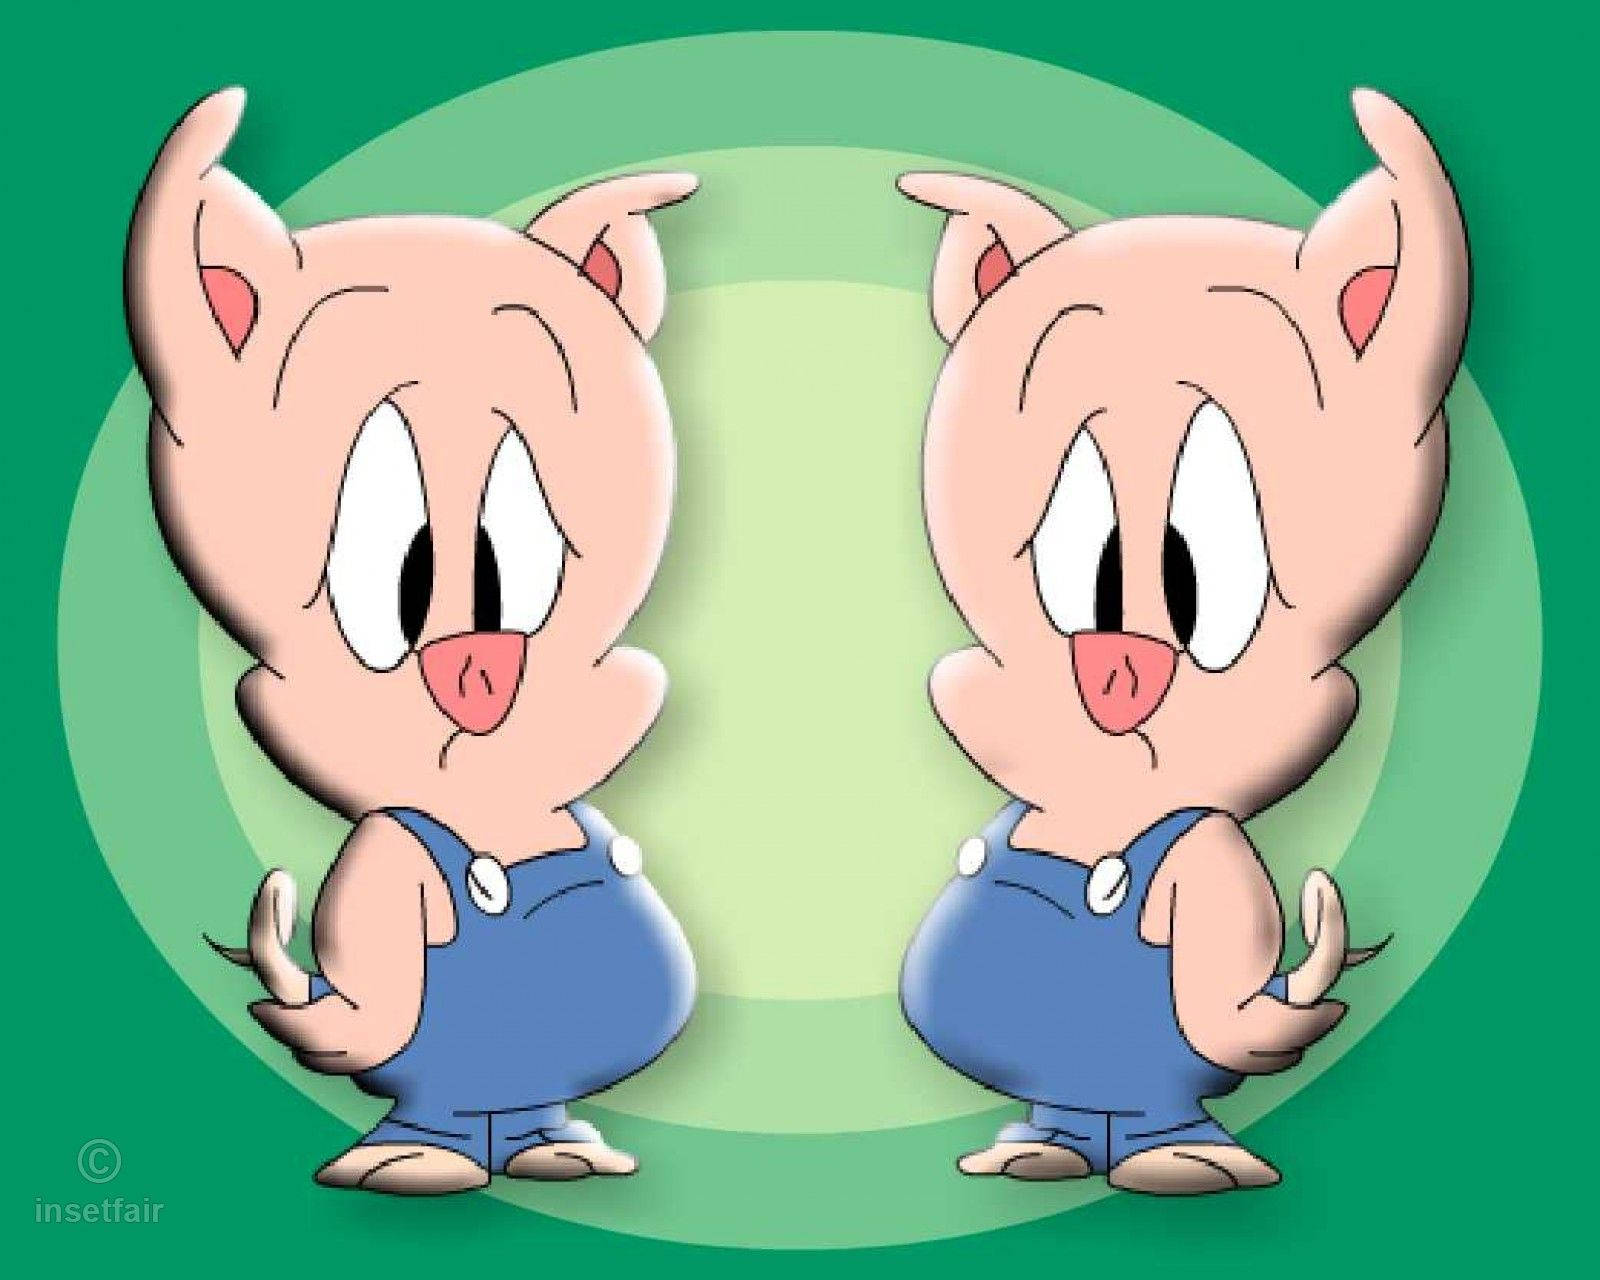 Porky Pig Fictional Character Picture